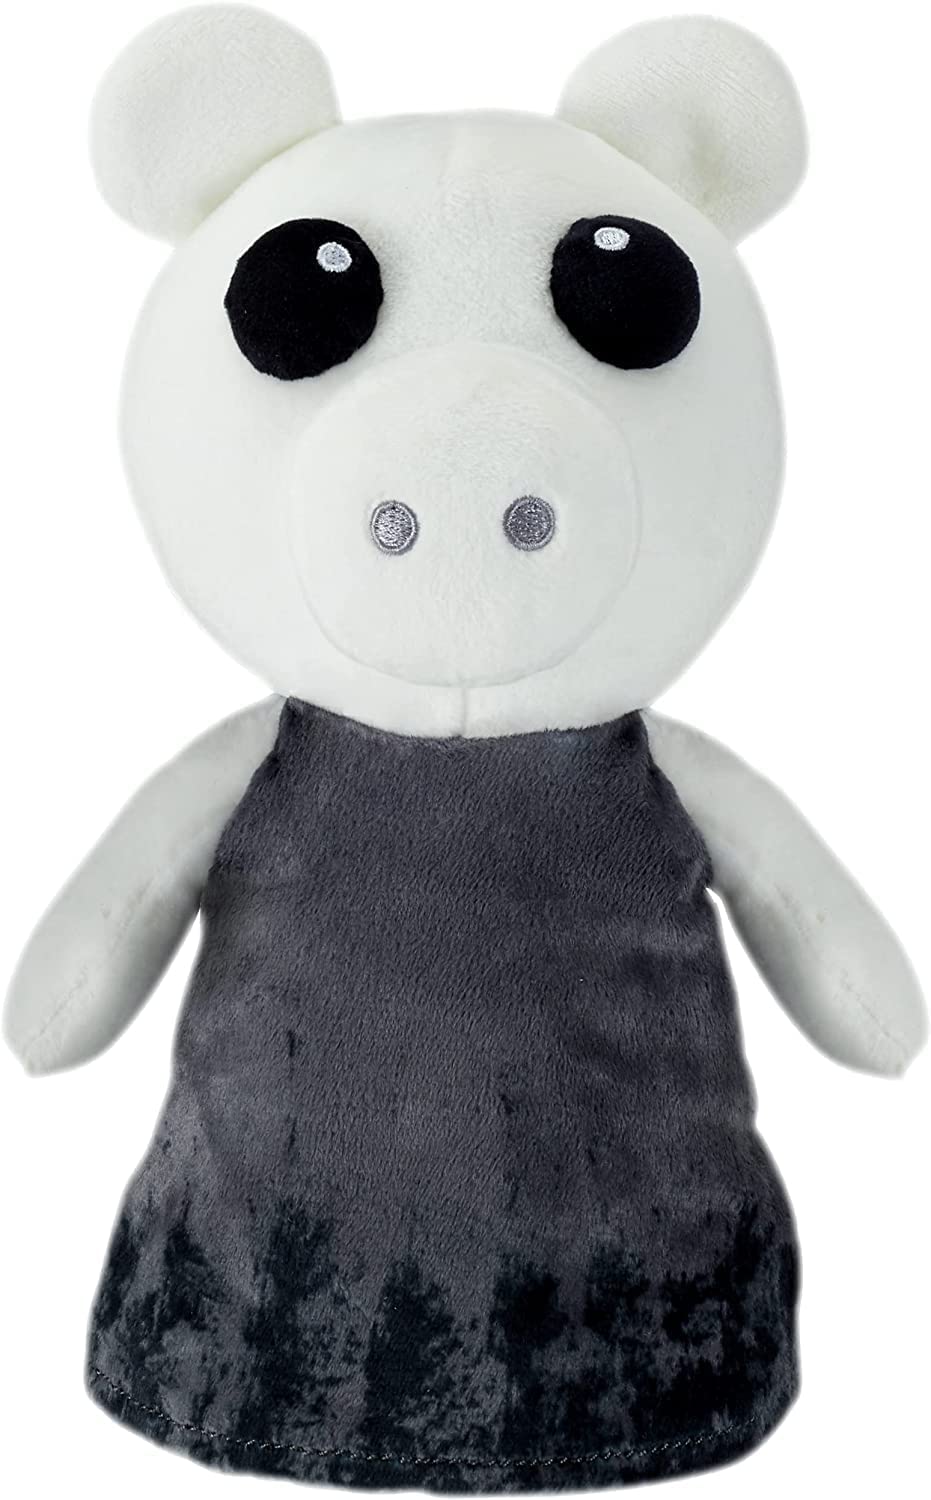 PIGGY Memory Series 2 8" Collectable Plush